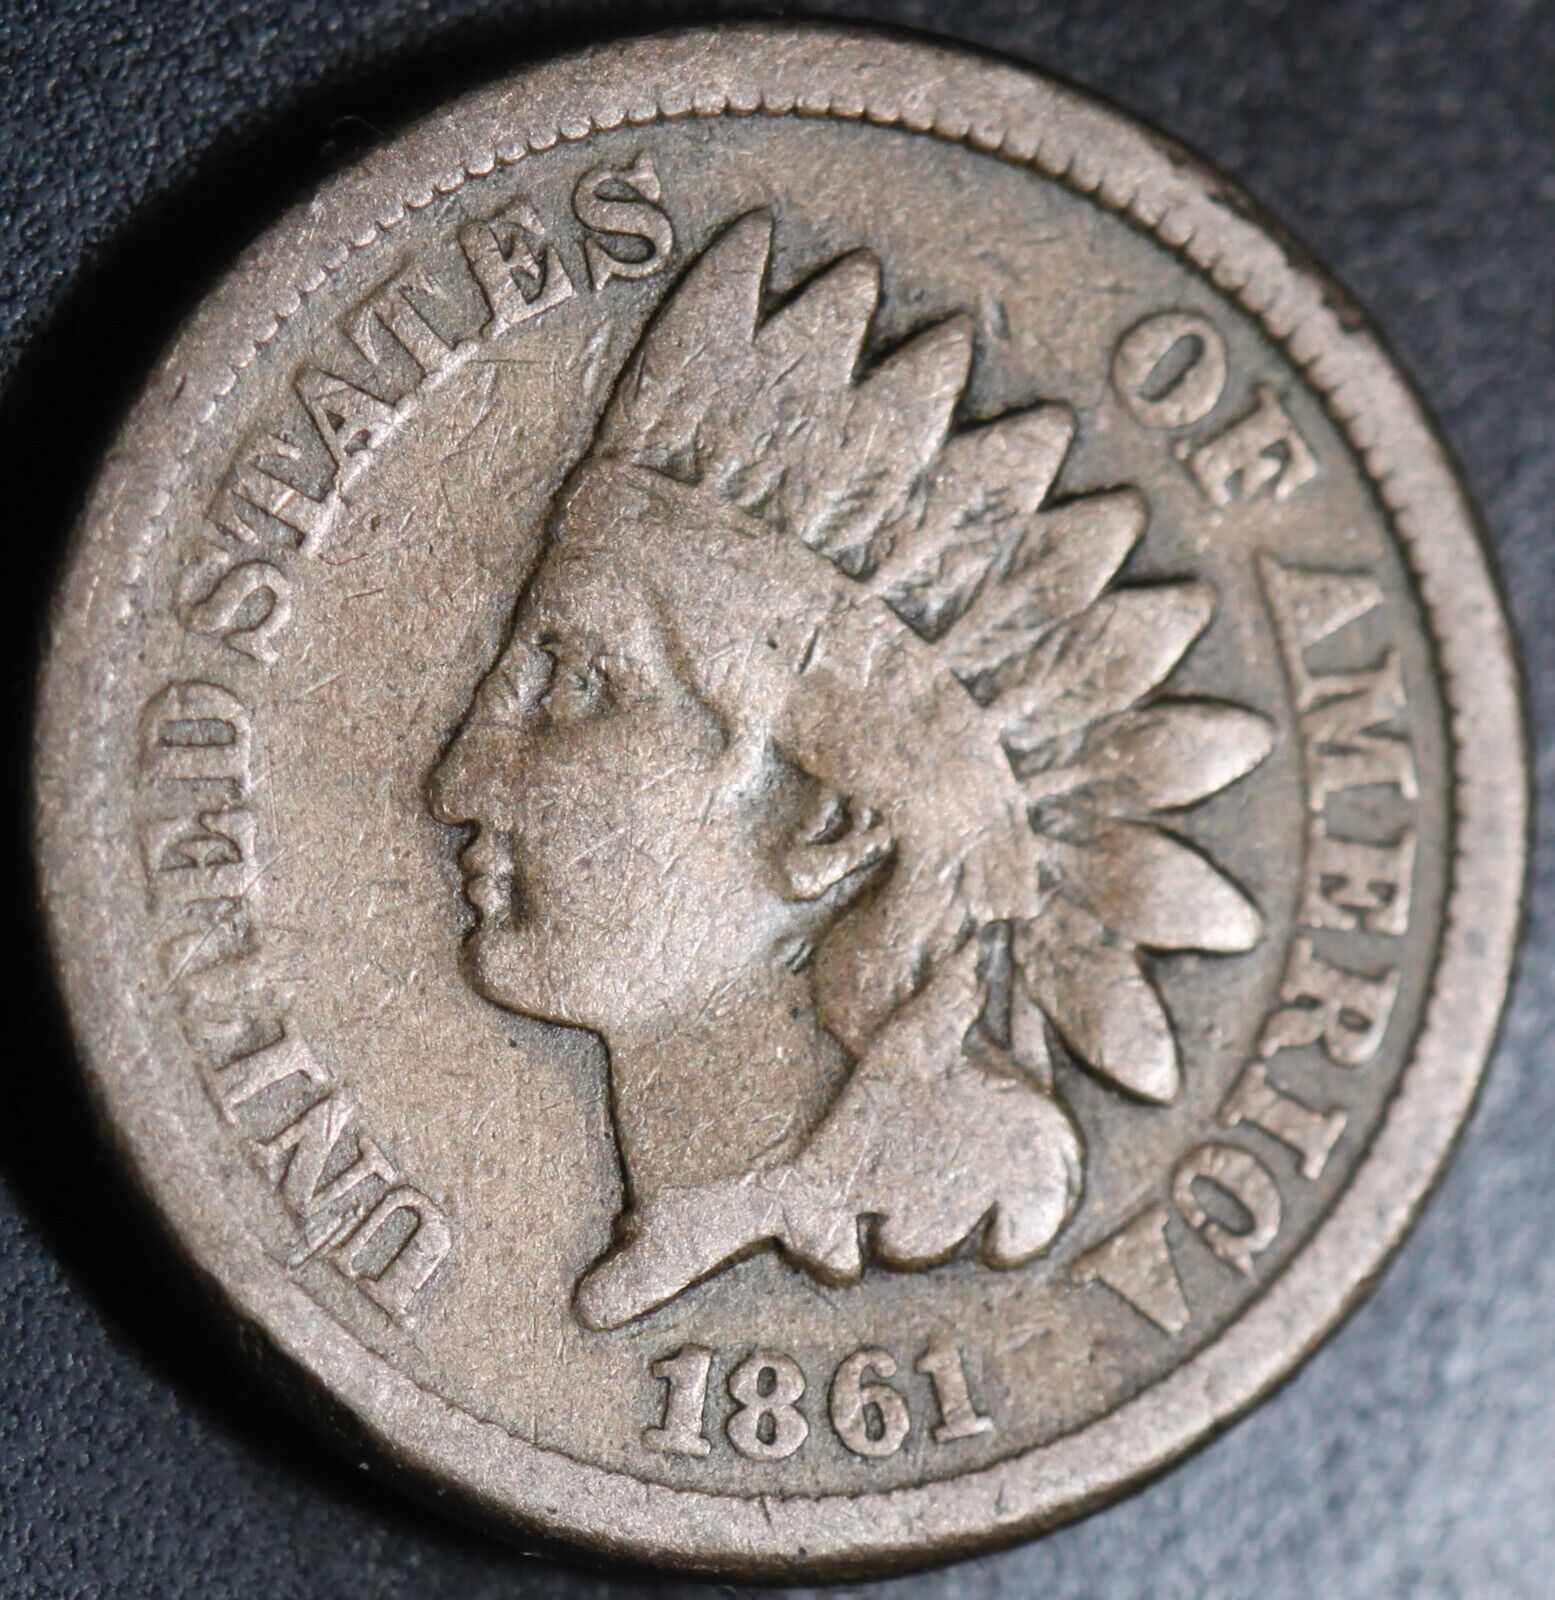 1861 INDIAN HEAD CENT - VG VERY GOOD